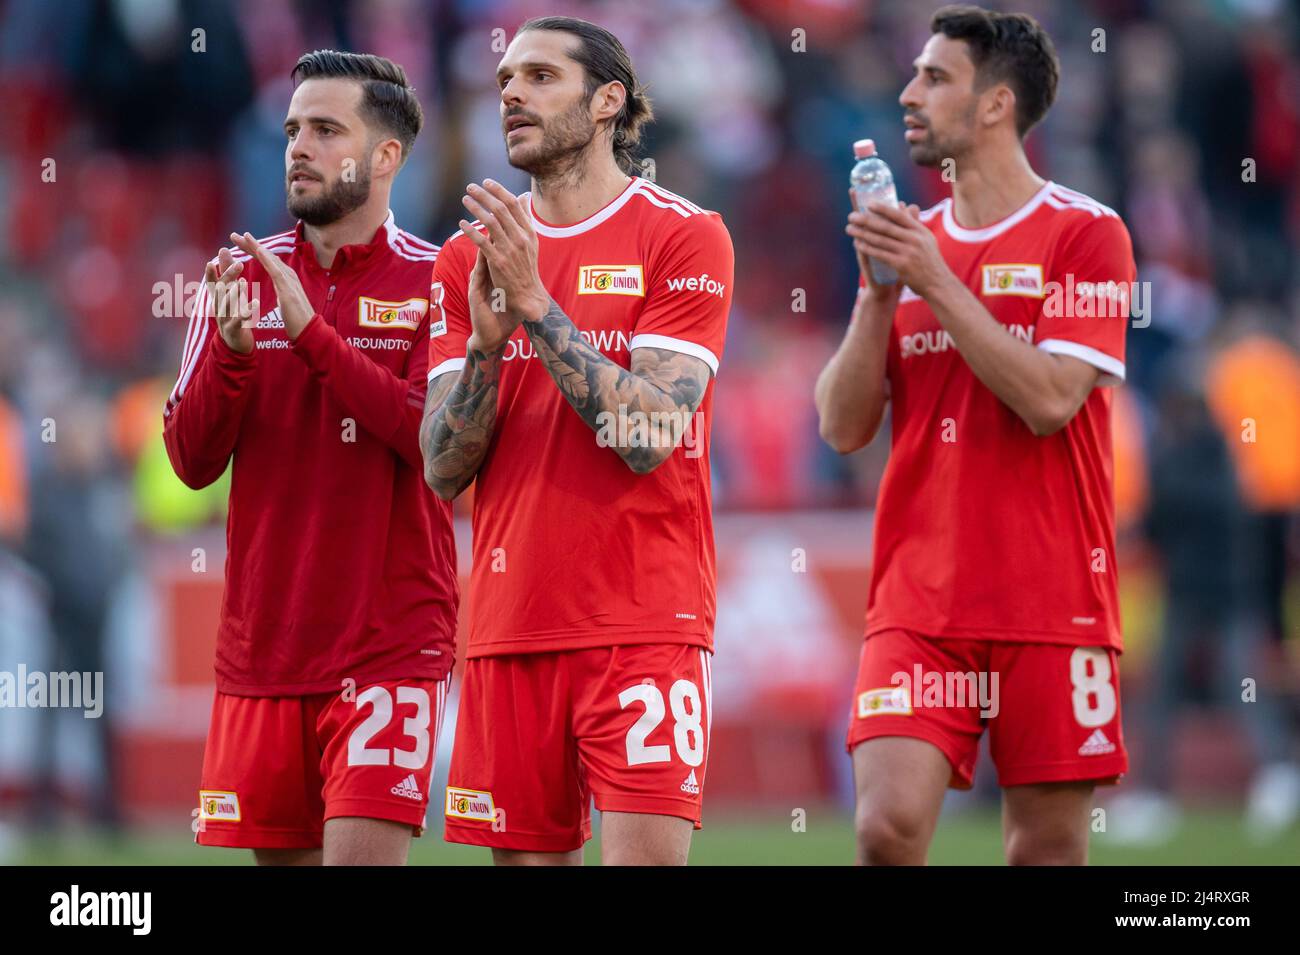 Berlin, Germany. 17th Apr, 2022. Soccer: Bundesliga, 1. FC Union Berlin - Eintracht Frankfurt, Matchday 30, An der Alten Försterei. Berlin's Niko Gießelmann (l-r), Christopher Trimmel and Rani Khedira laugh and thank the crowd after the win. Credit: Andreas Gora/dpa - IMPORTANT NOTE: In accordance with the requirements of the DFL Deutsche Fußball Liga and the DFB Deutscher Fußball-Bund, it is prohibited to use or have used photographs taken in the stadium and/or of the match in the form of sequence pictures and/or video-like photo series./dpa/Alamy Live News Stock Photo